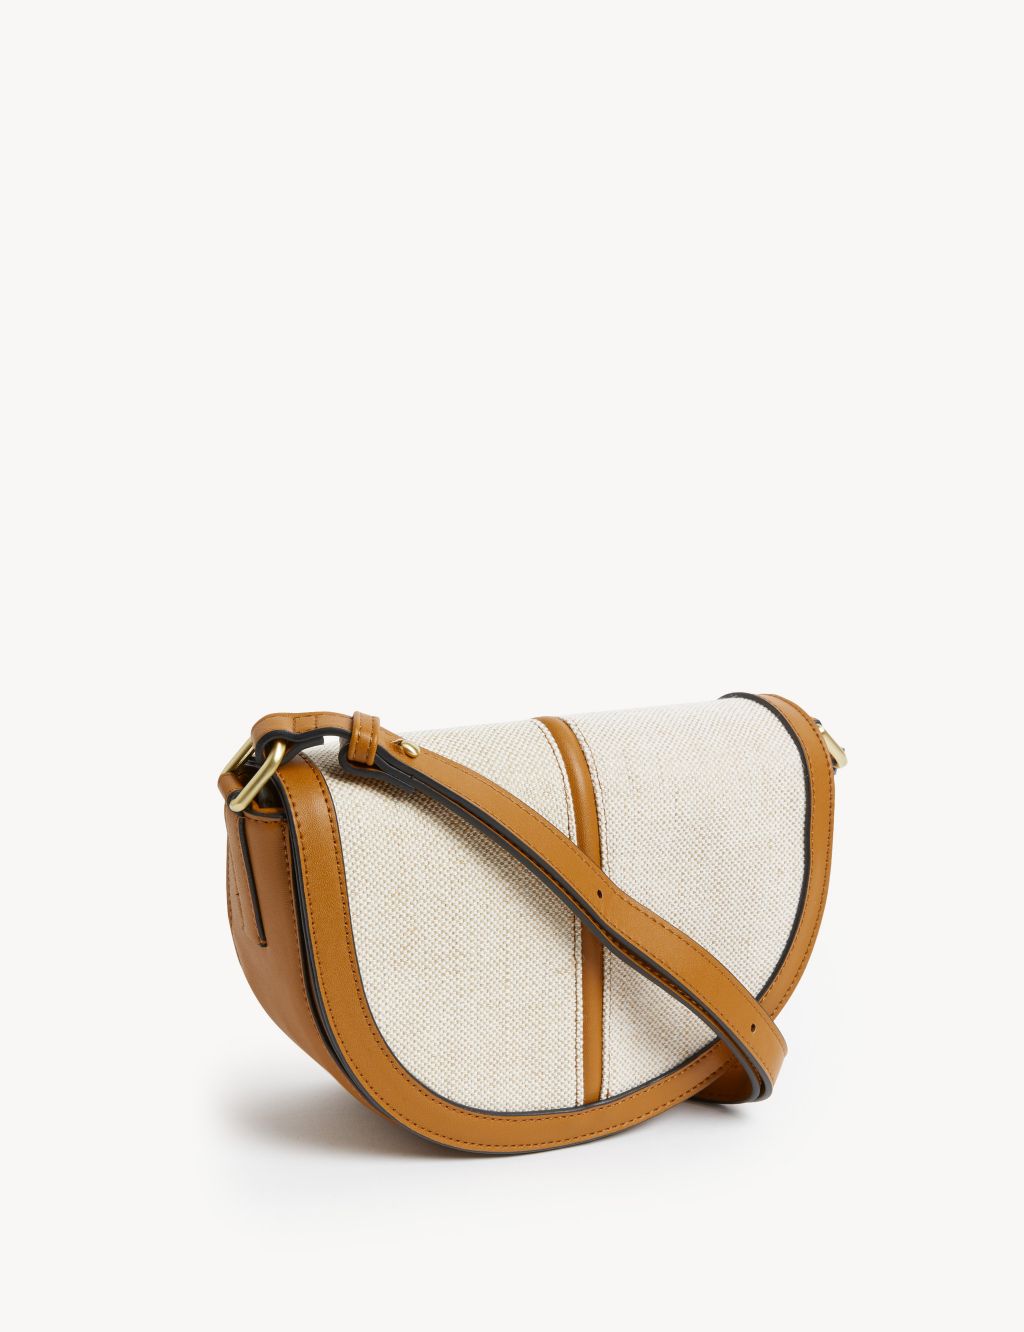 Faux Leather Cross Body Bag image 1